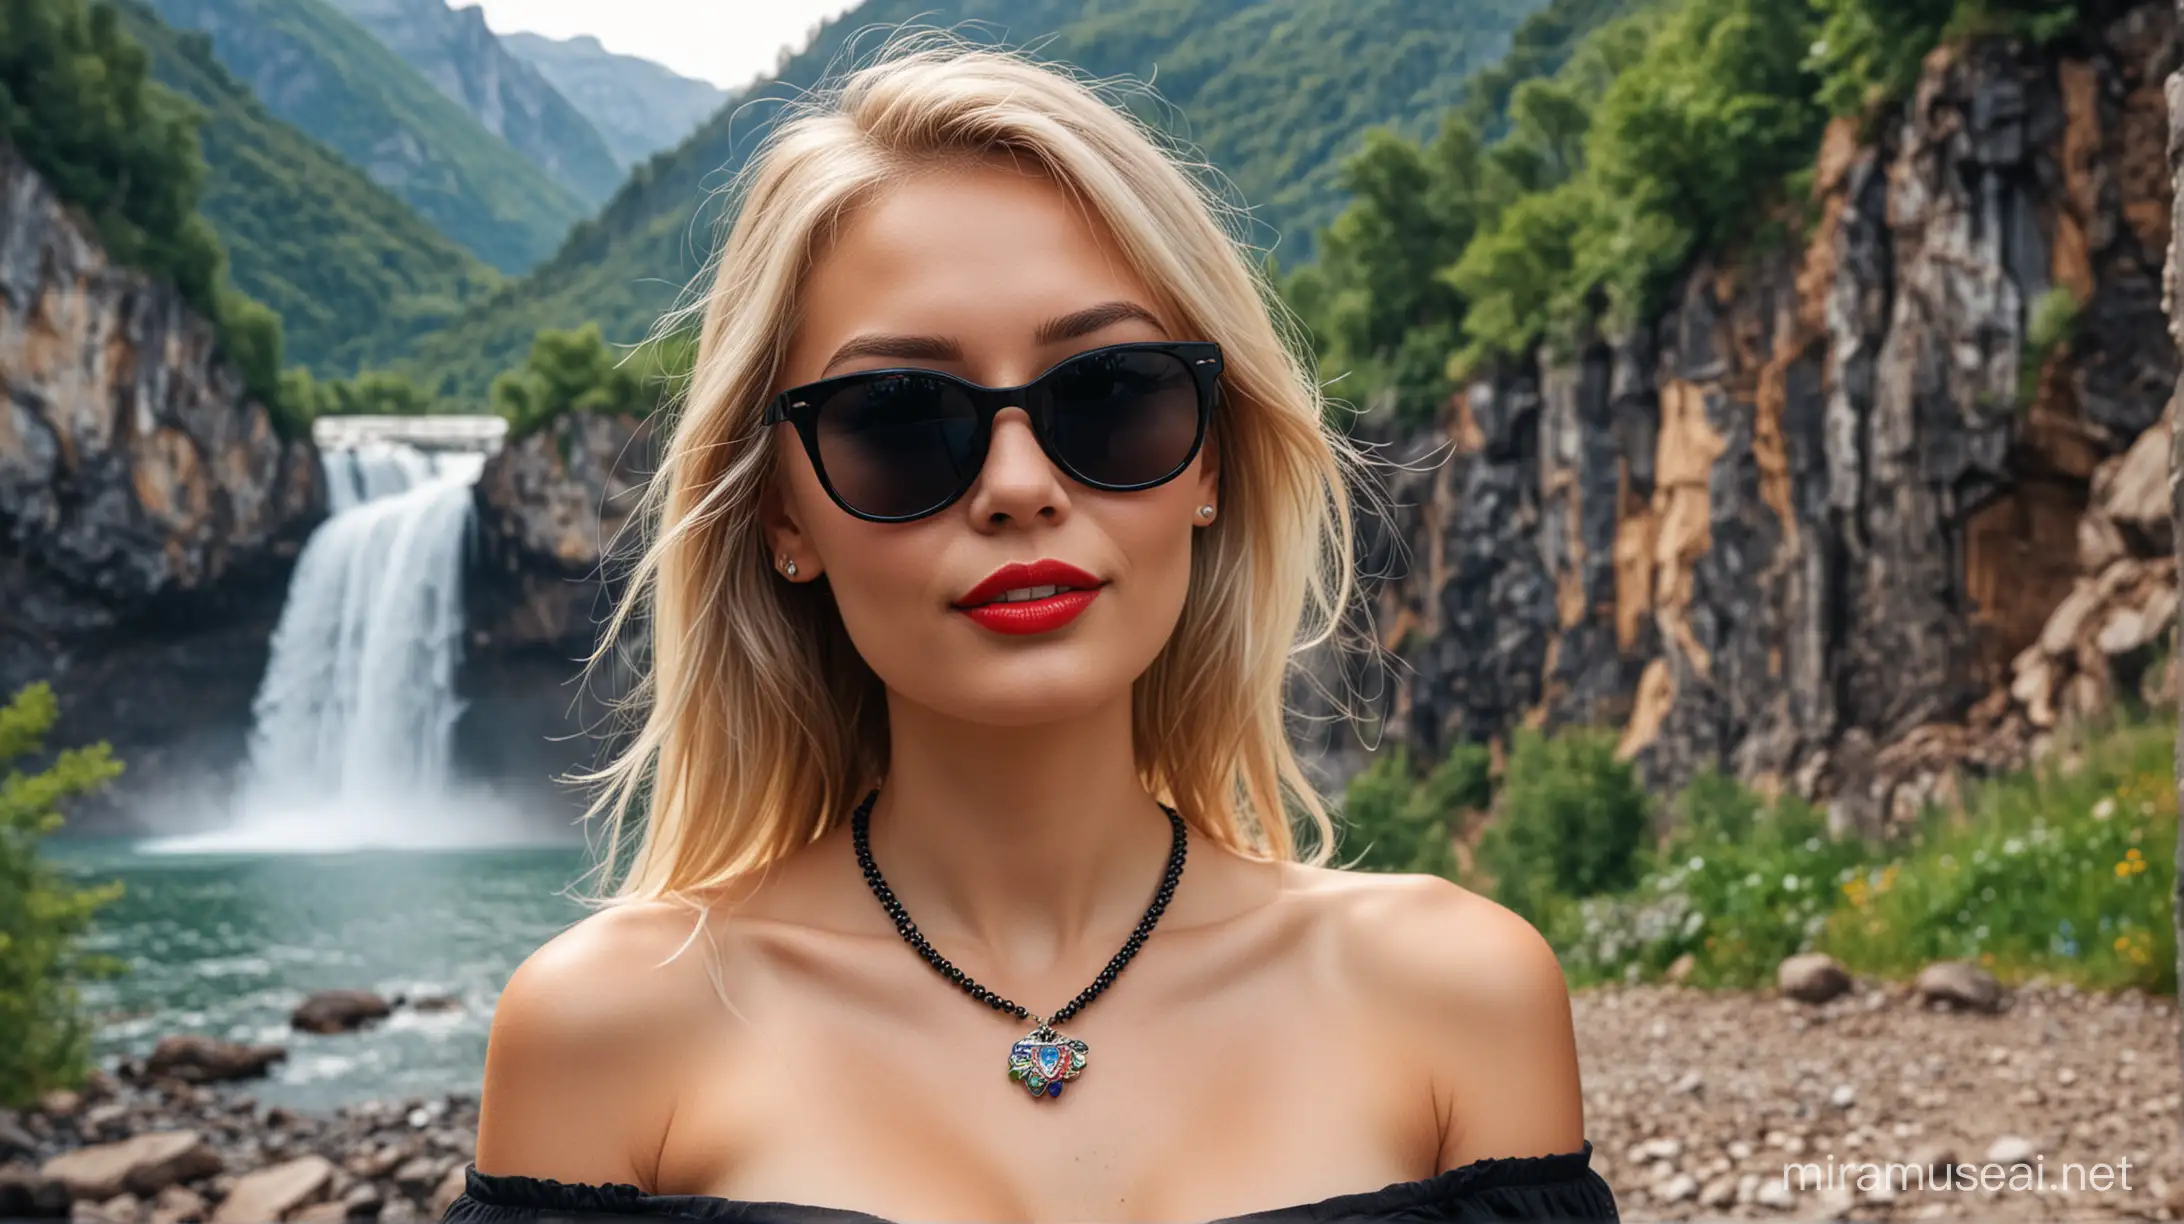 realistic portrait of a beautiful russian girls, wearing black color dress, medium sized boobs, blonde hairs, fair complexion, blue color necklace, bracelet in right hand, mountains in the background, greenery, black sun glasses, waterfall with rainbow in the background, light smile on red lips, sharp nose, dimples on cheeks